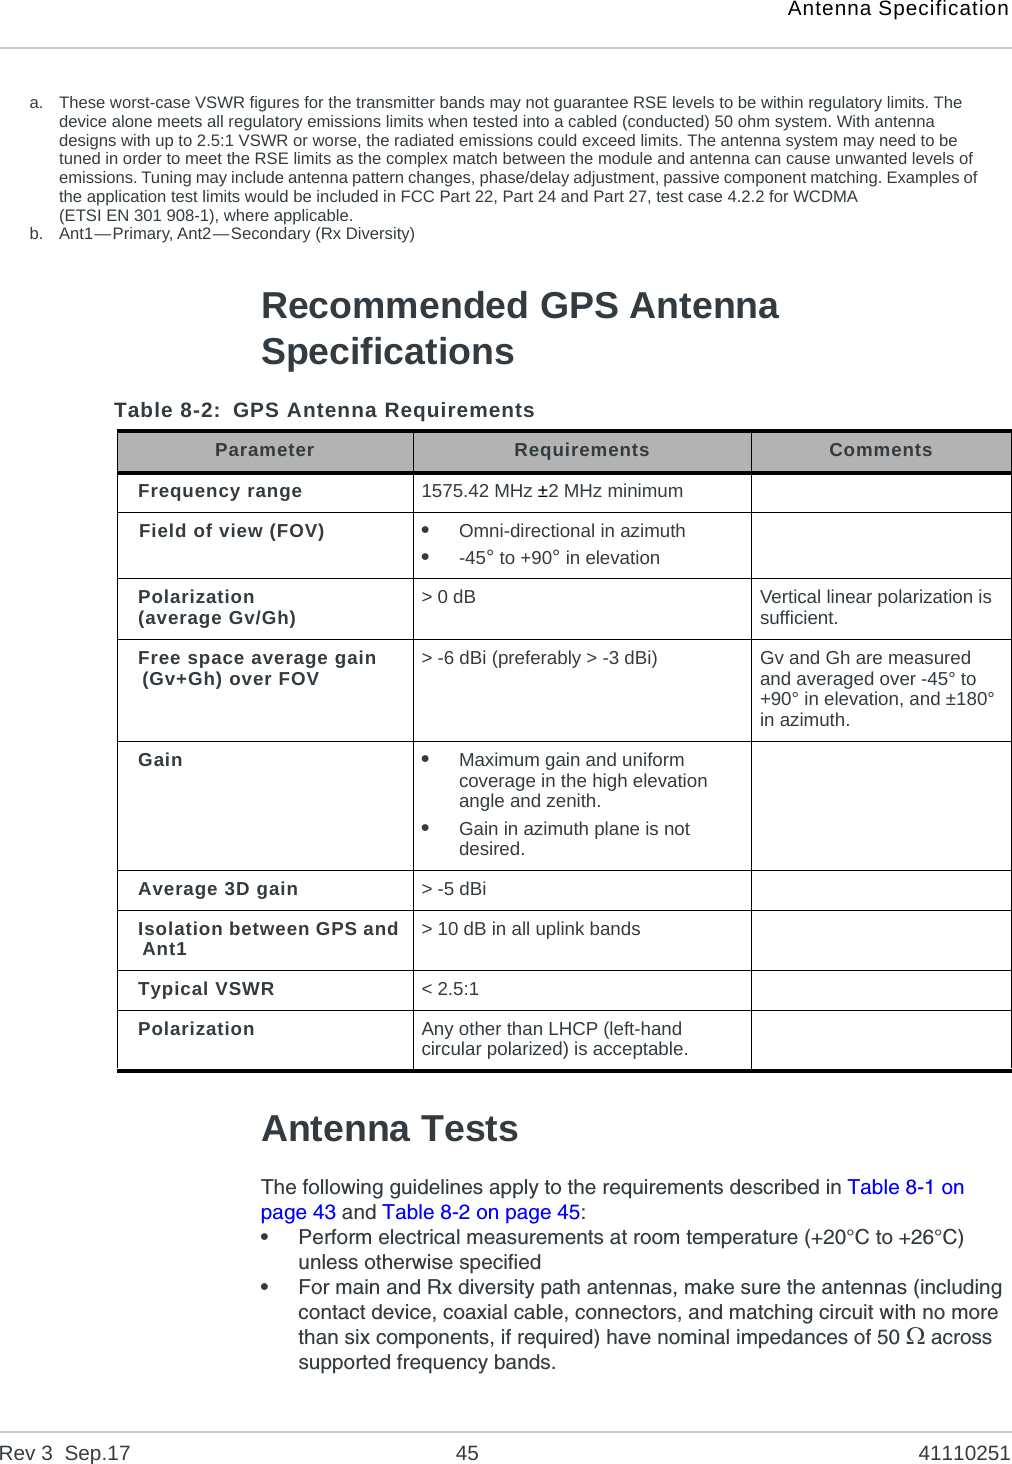 Antenna SpecificationRev 3  Sep.17 45 41110251Recommended GPS Antenna SpecificationsAntenna TestsThe following guidelines apply to the requirements described in Table 8-1 on page 43 and Table 8-2 on page 45:•Perform electrical measurements at room temperature (+20°C to +26°C) unless otherwise specified•For main and Rx diversity path antennas, make sure the antennas (including contact device, coaxial cable, connectors, and matching circuit with no more than six components, if required) have nominal impedances of 50  across supported frequency bands.a. These worst-case VSWR figures for the transmitter bands may not guarantee RSE levels to be within regulatory limits. The device alone meets all regulatory emissions limits when tested into a cabled (conducted) 50 ohm system. With antenna designs with up to 2.5:1 VSWR or worse, the radiated emissions could exceed limits. The antenna system may need to be tuned in order to meet the RSE limits as the complex match between the module and antenna can cause unwanted levels of emissions. Tuning may include antenna pattern changes, phase/delay adjustment, passive component matching. Examples of the application test limits would be included in FCC Part 22, Part 24 and Part 27, test case 4.2.2 for WCDMA (ETSI EN 301 908-1), where applicable.b. Ant1—Primary, Ant2—Secondary (Rx Diversity)Table 8-2: GPS Antenna RequirementsParameter Requirements CommentsFrequency range 1575.42 MHz ±2MHz minimumField of view (FOV) •Omni-directional in azimuth•-45° to +90° in elevationPolarization(average Gv/Gh) &gt;0dB Vertical linear polarization is sufficient.Free space average gain (Gv+Gh) over FOV &gt; -6 dBi (preferably &gt; -3 dBi) Gv and Gh are measured and averaged over -45° to +90° in elevation, and ±180° in azimuth.Gain •Maximum gain and uniform coverage in the high elevation angle and zenith.•Gain in azimuth plane is not desired.Average 3D gain &gt;-5dBiIsolation between GPS and Ant1 &gt; 10 dB in all uplink bandsTypical VSWR &lt; 2.5:1Polarization Any other than LHCP (left-hand circular polarized) is acceptable.